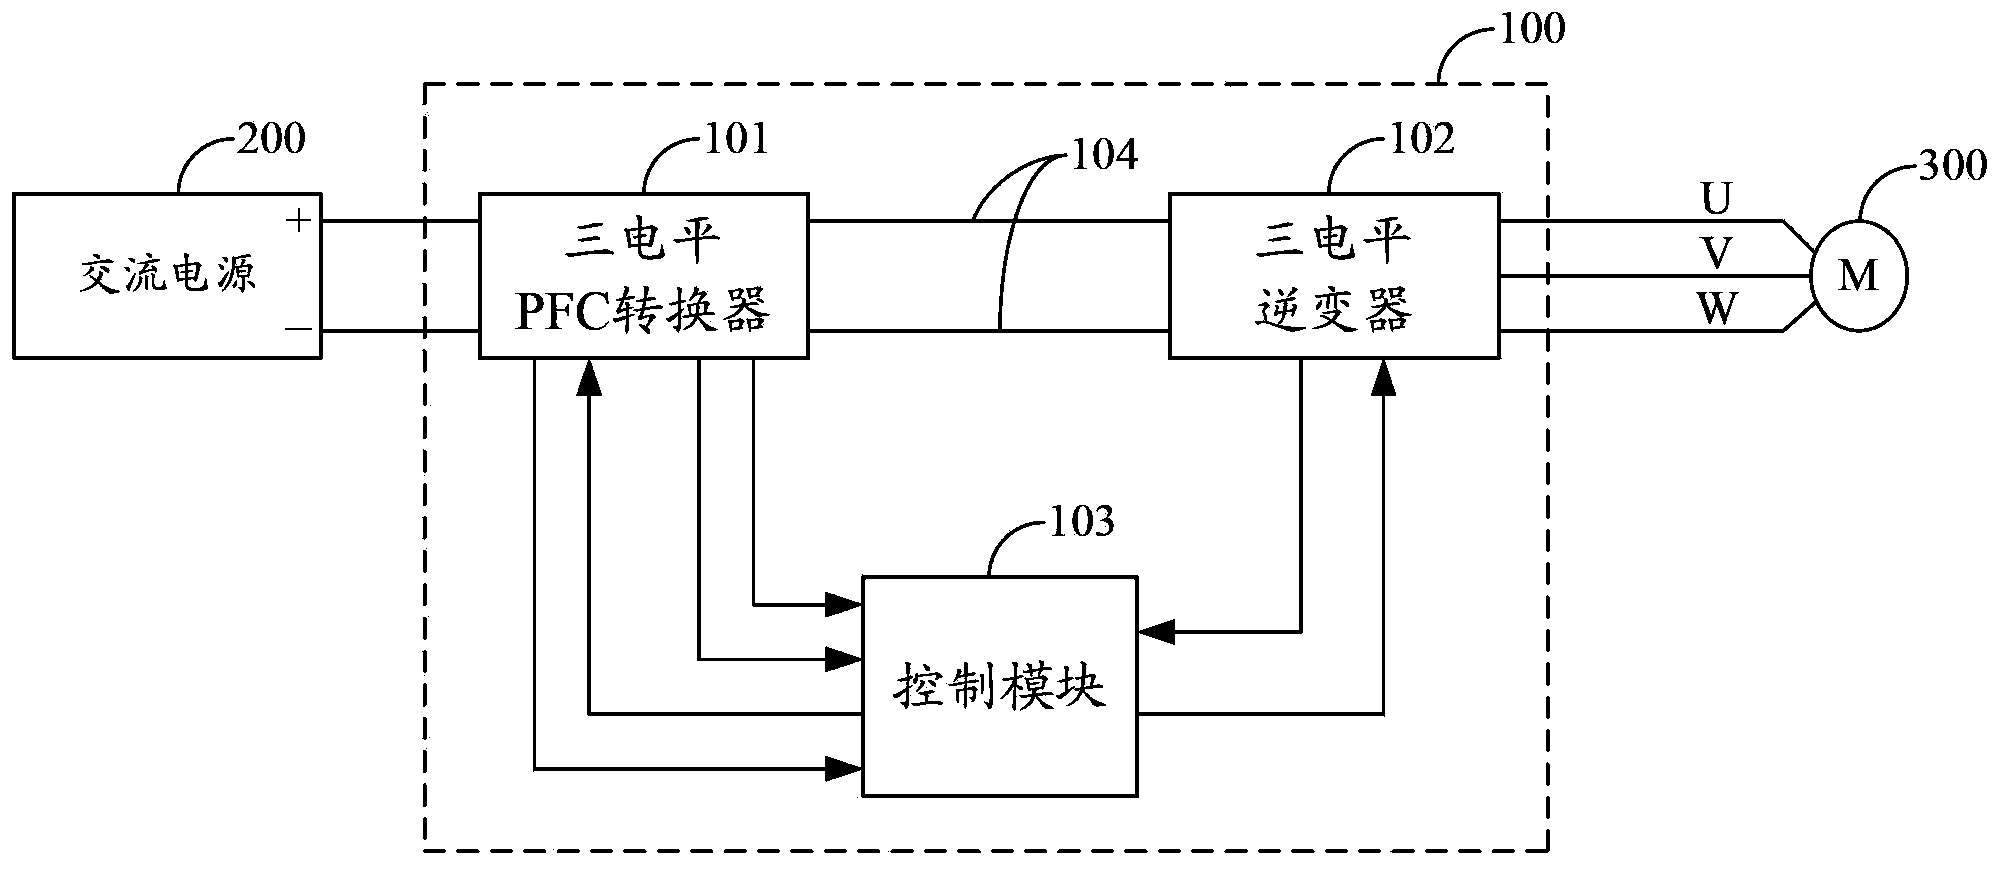 Air-conditioner compressor control circuit and variable frequency air-conditioner